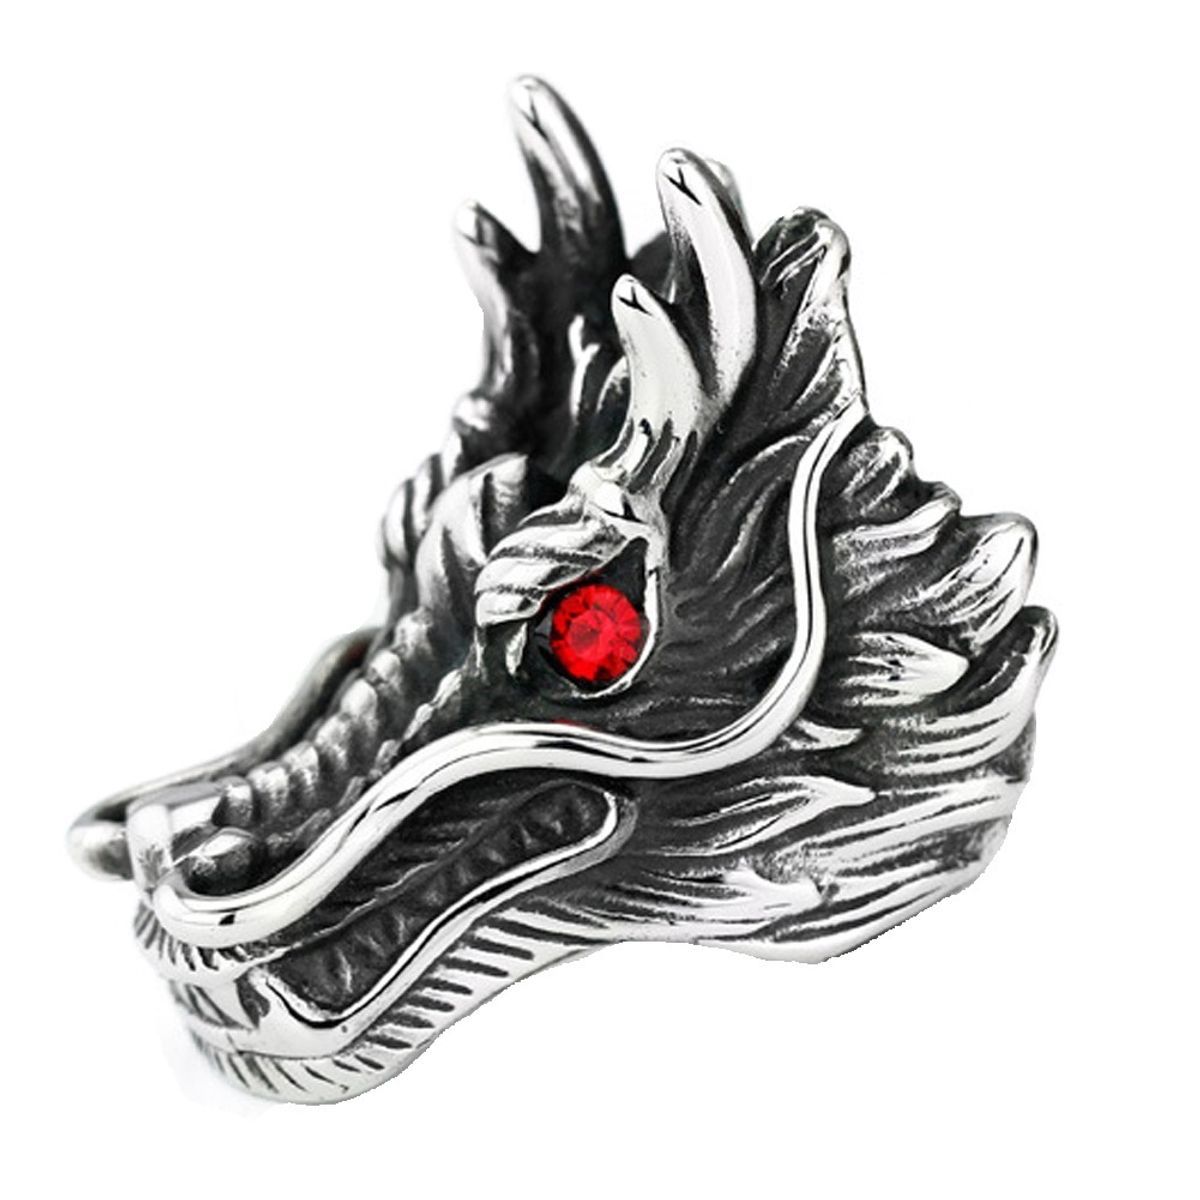 Dragon Men's Ring: 'Power And Fury' Sculpted Dragon Head Ruby Ring